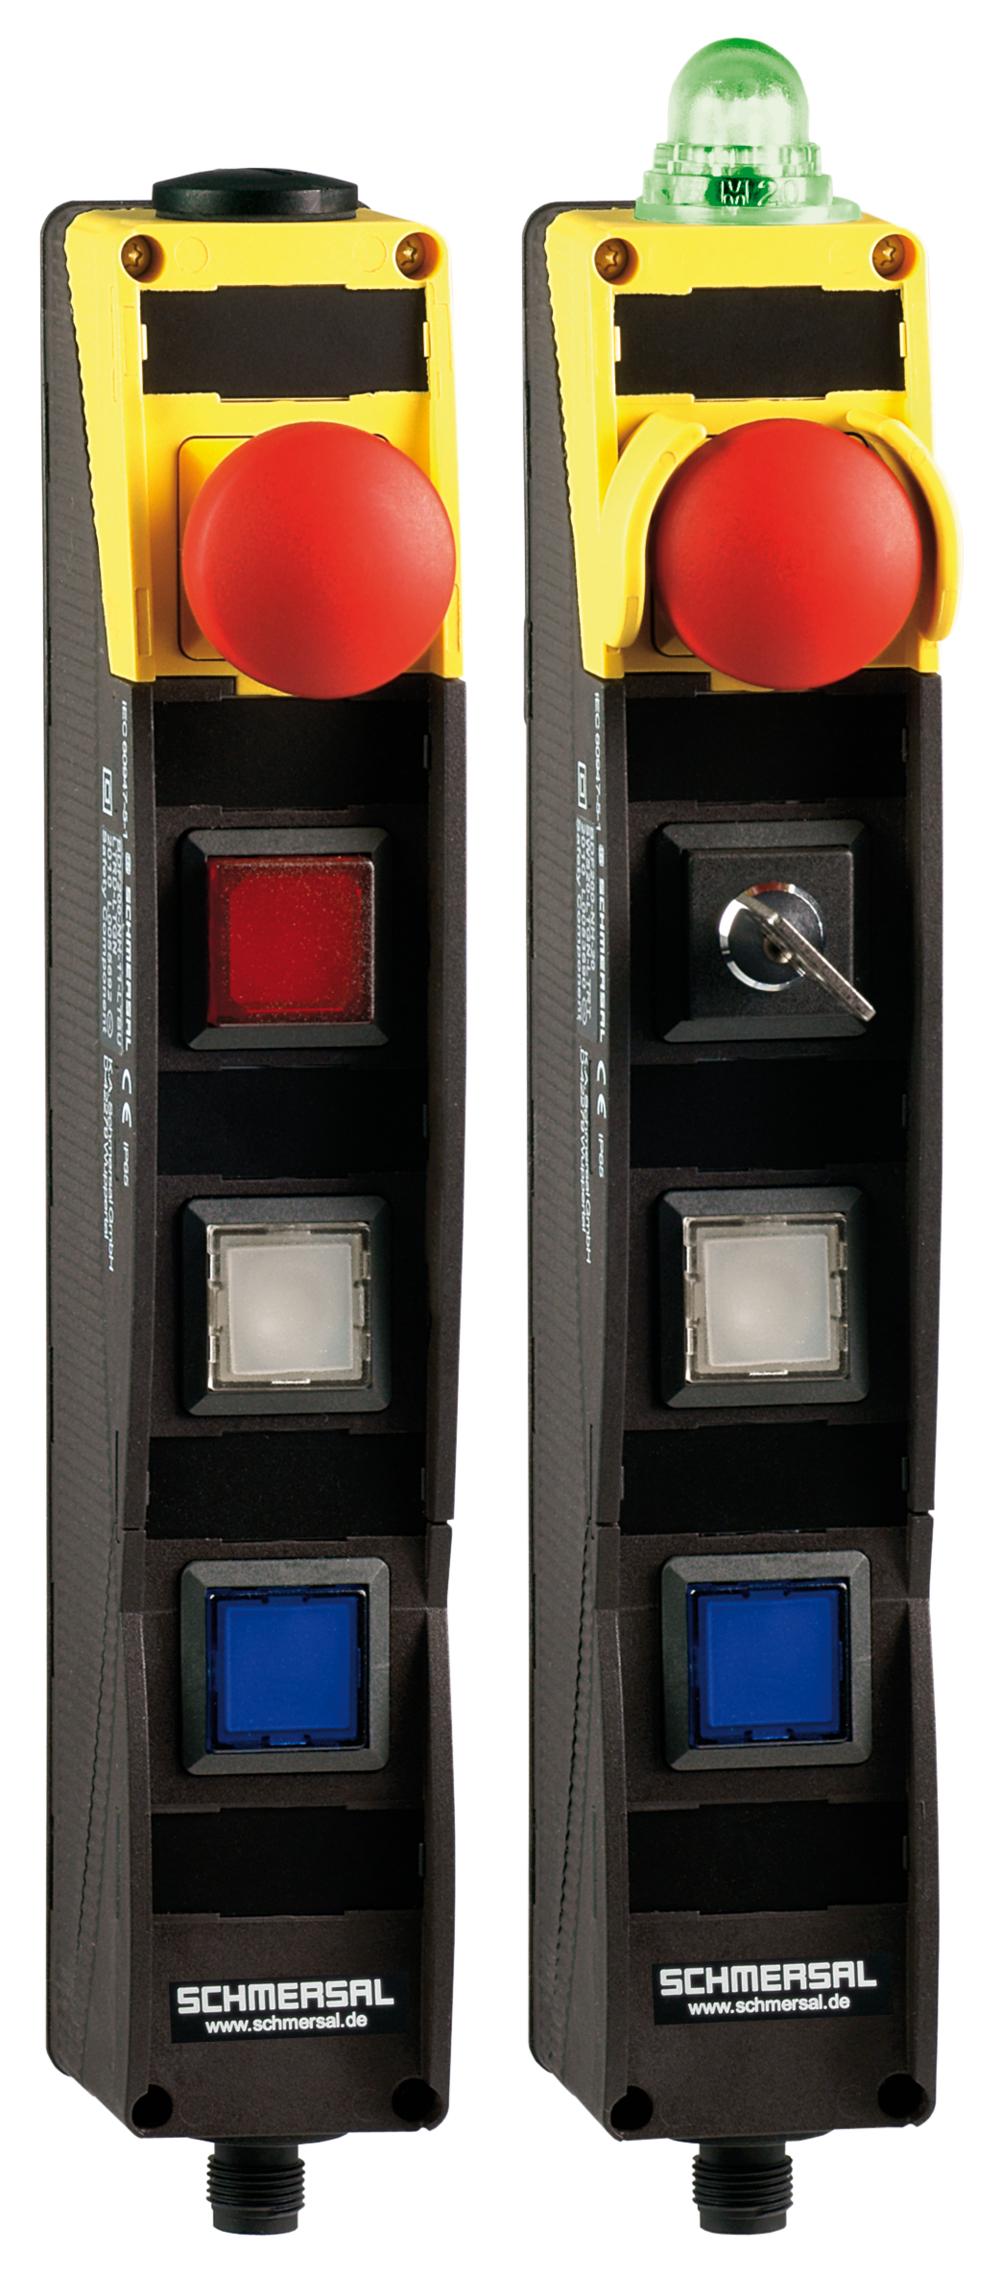 Schmersal BDF200-ST1-AS-NH-SWS20S1-LTYE-DTWH-G24 AS interface safety at work; Safety switchgear; Integrated AS-Interface; with connector plug M12 bottom; Pos 1: E-STOP; Pos 2: Key selector switch, 2 positions, key removable position 0; Pos 3: YELLOW illuminated pushbutton; Pos 4: WHITE pushbutton; Indic